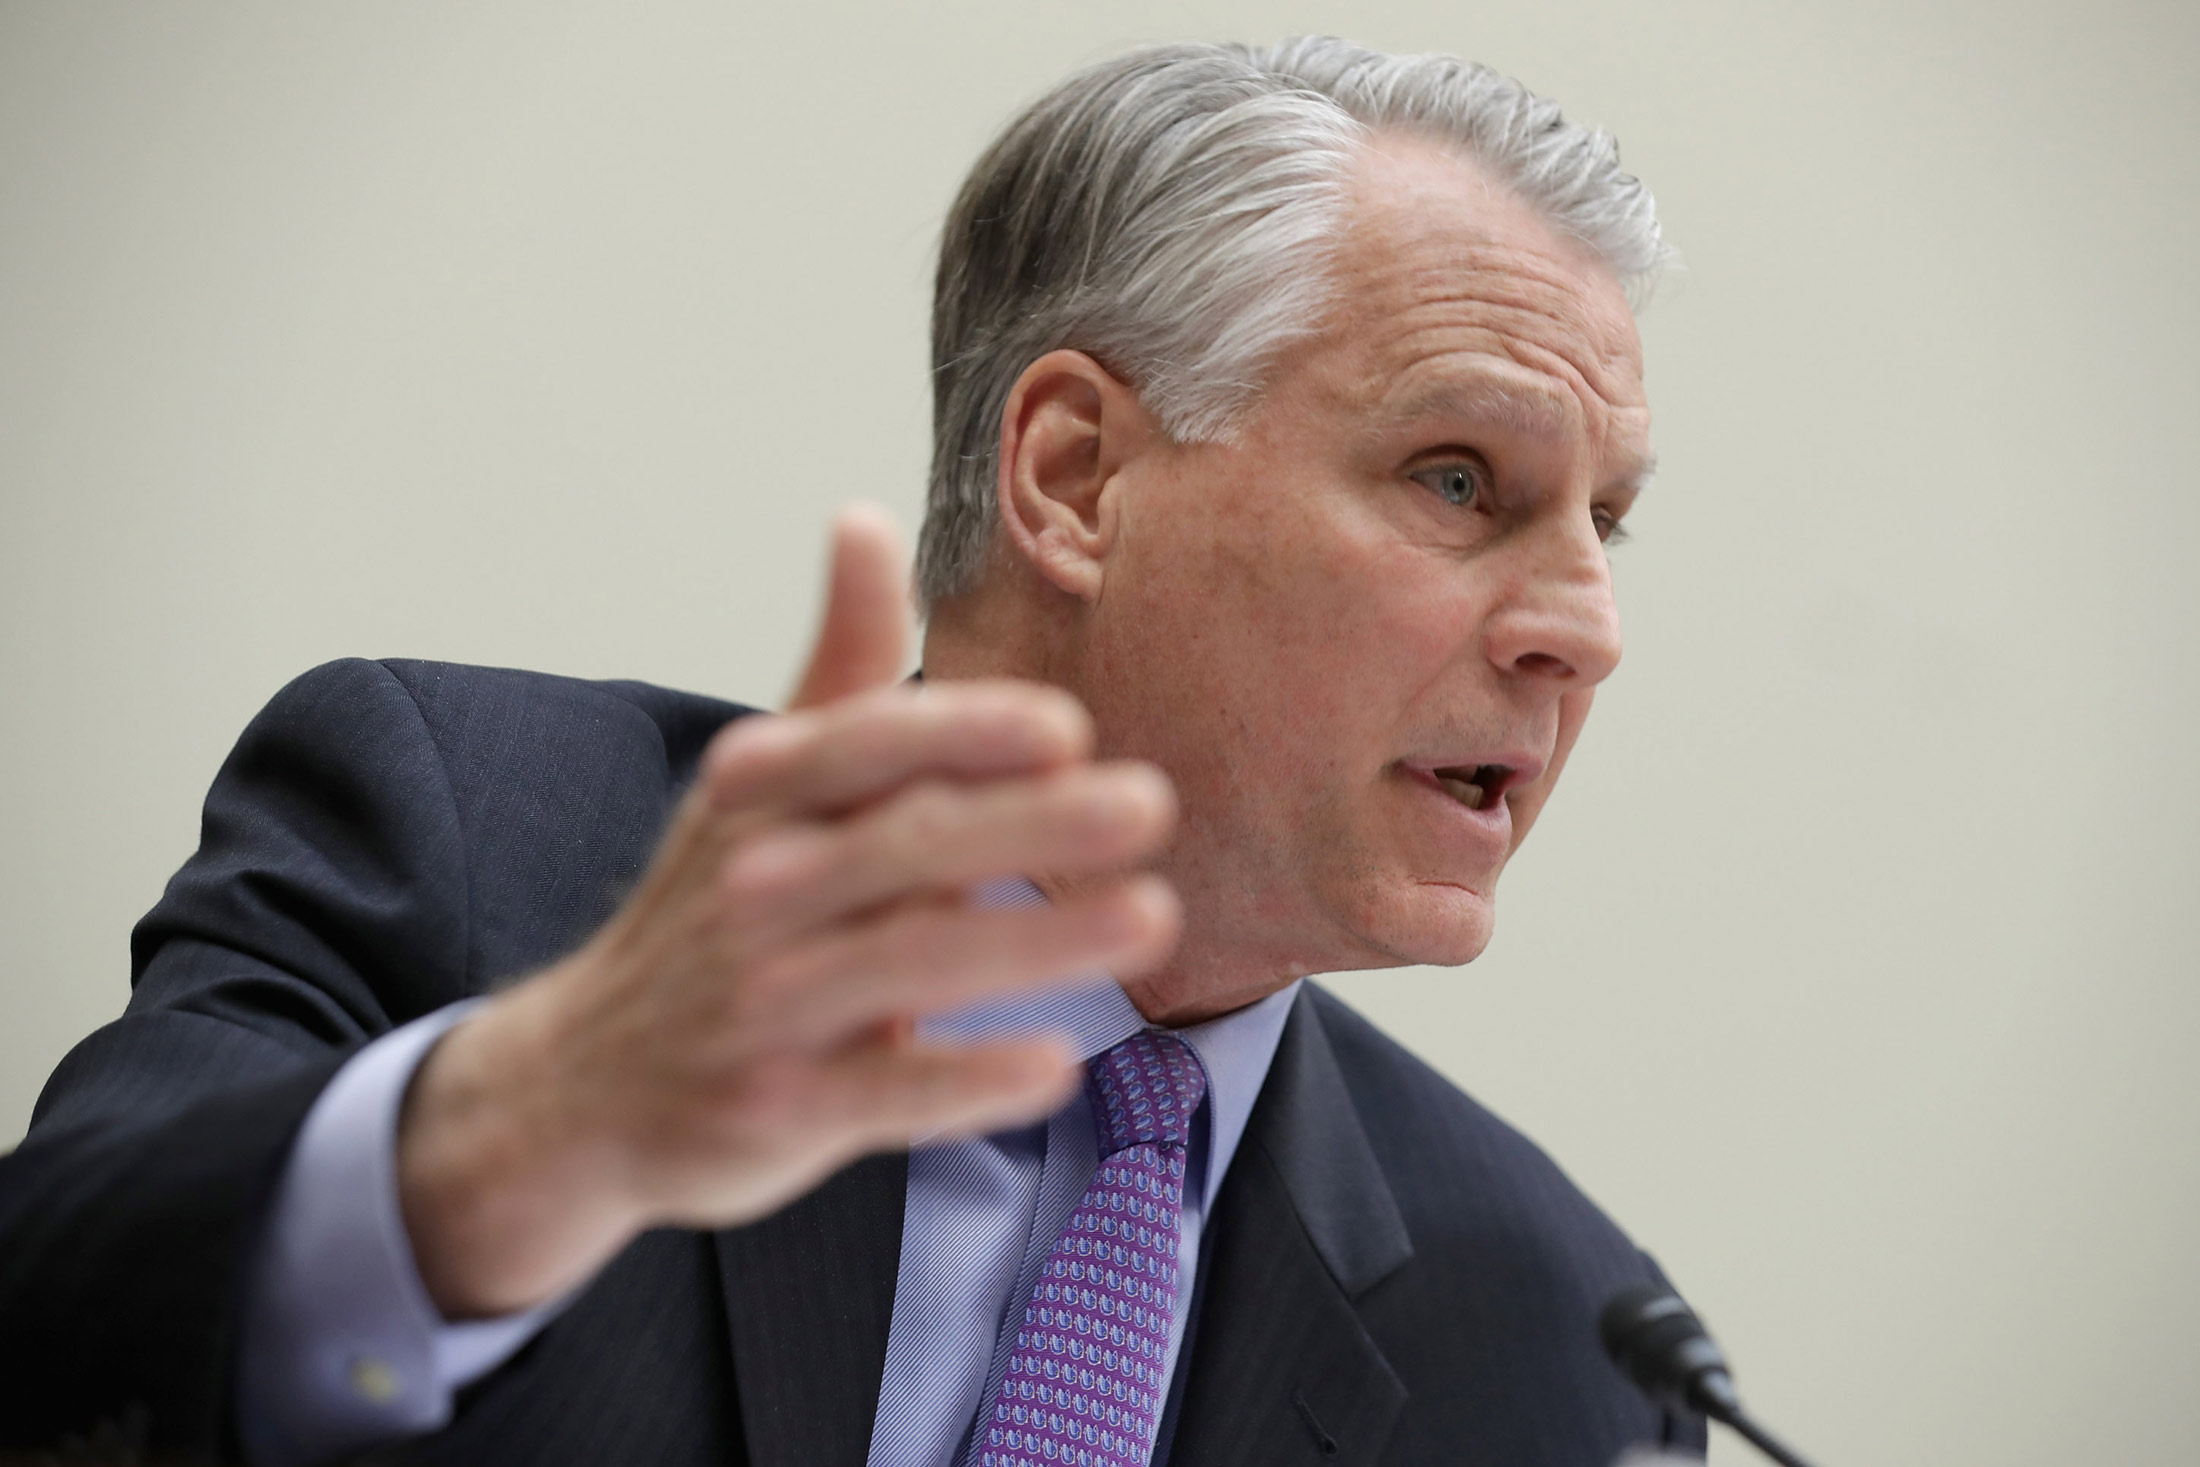 ormer congressman and 9/11 Commissioner Tim Roemer (D-IN) testifies before the House Foreign Affairs Committee's Terrorism, Nonproliferation, and Trade Subcommittee holds a hearing on the U.S.-Saudi Arabia counterterrorism relationship in the Rayburn House Office Building on Capitol Hill May 24, 2016 in Washington, DC.
